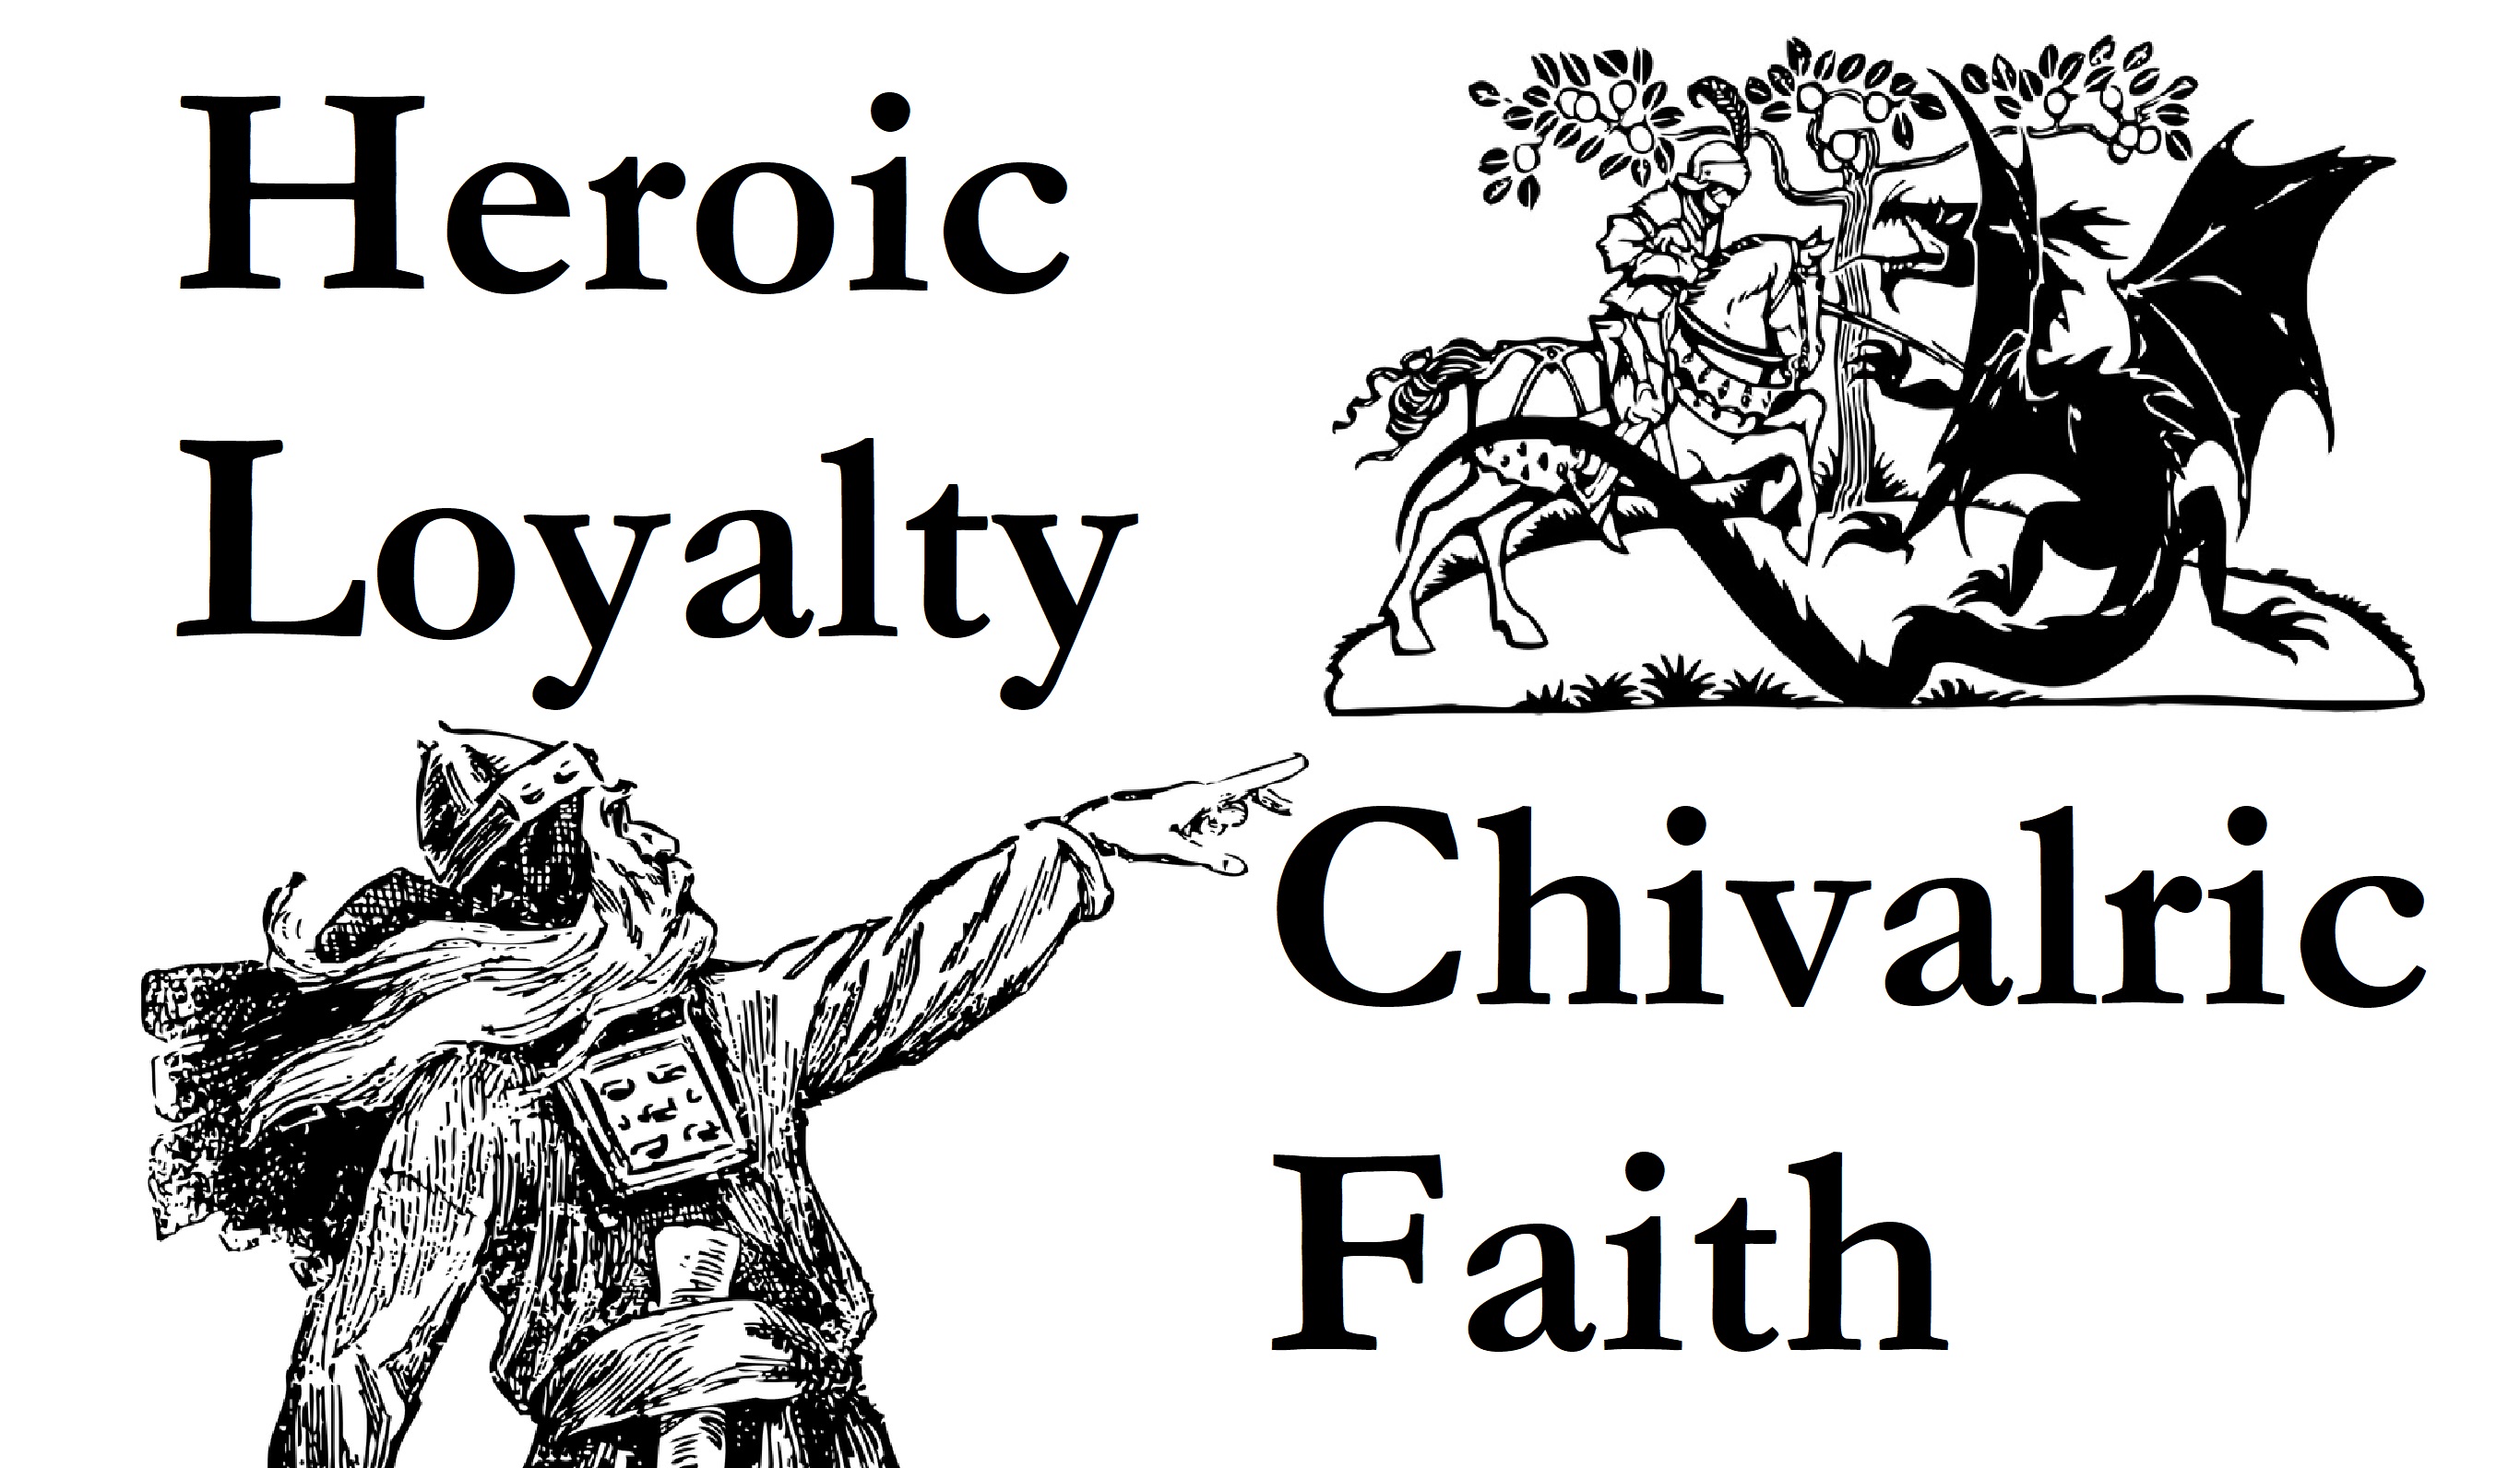 Heroic Loyalty vs. Chivalric Faith in Medieval Literature